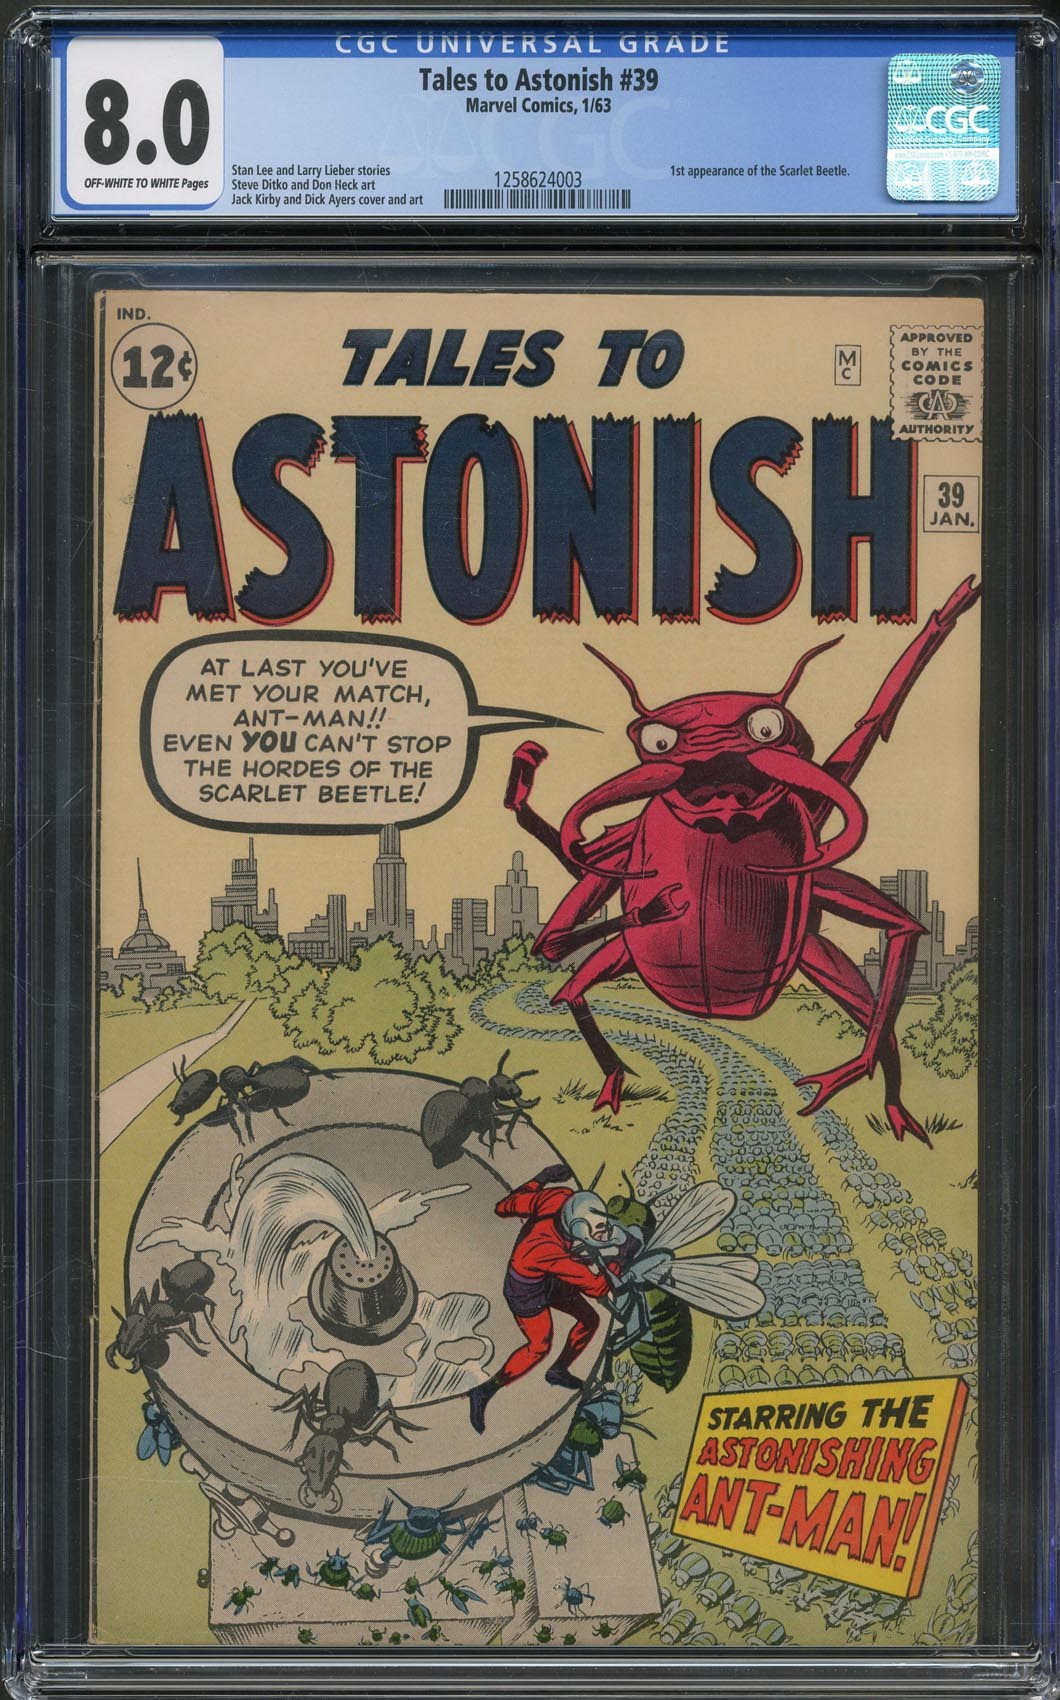 - Tales to Astonish #39 Featuring Ant Man (CGC 8)